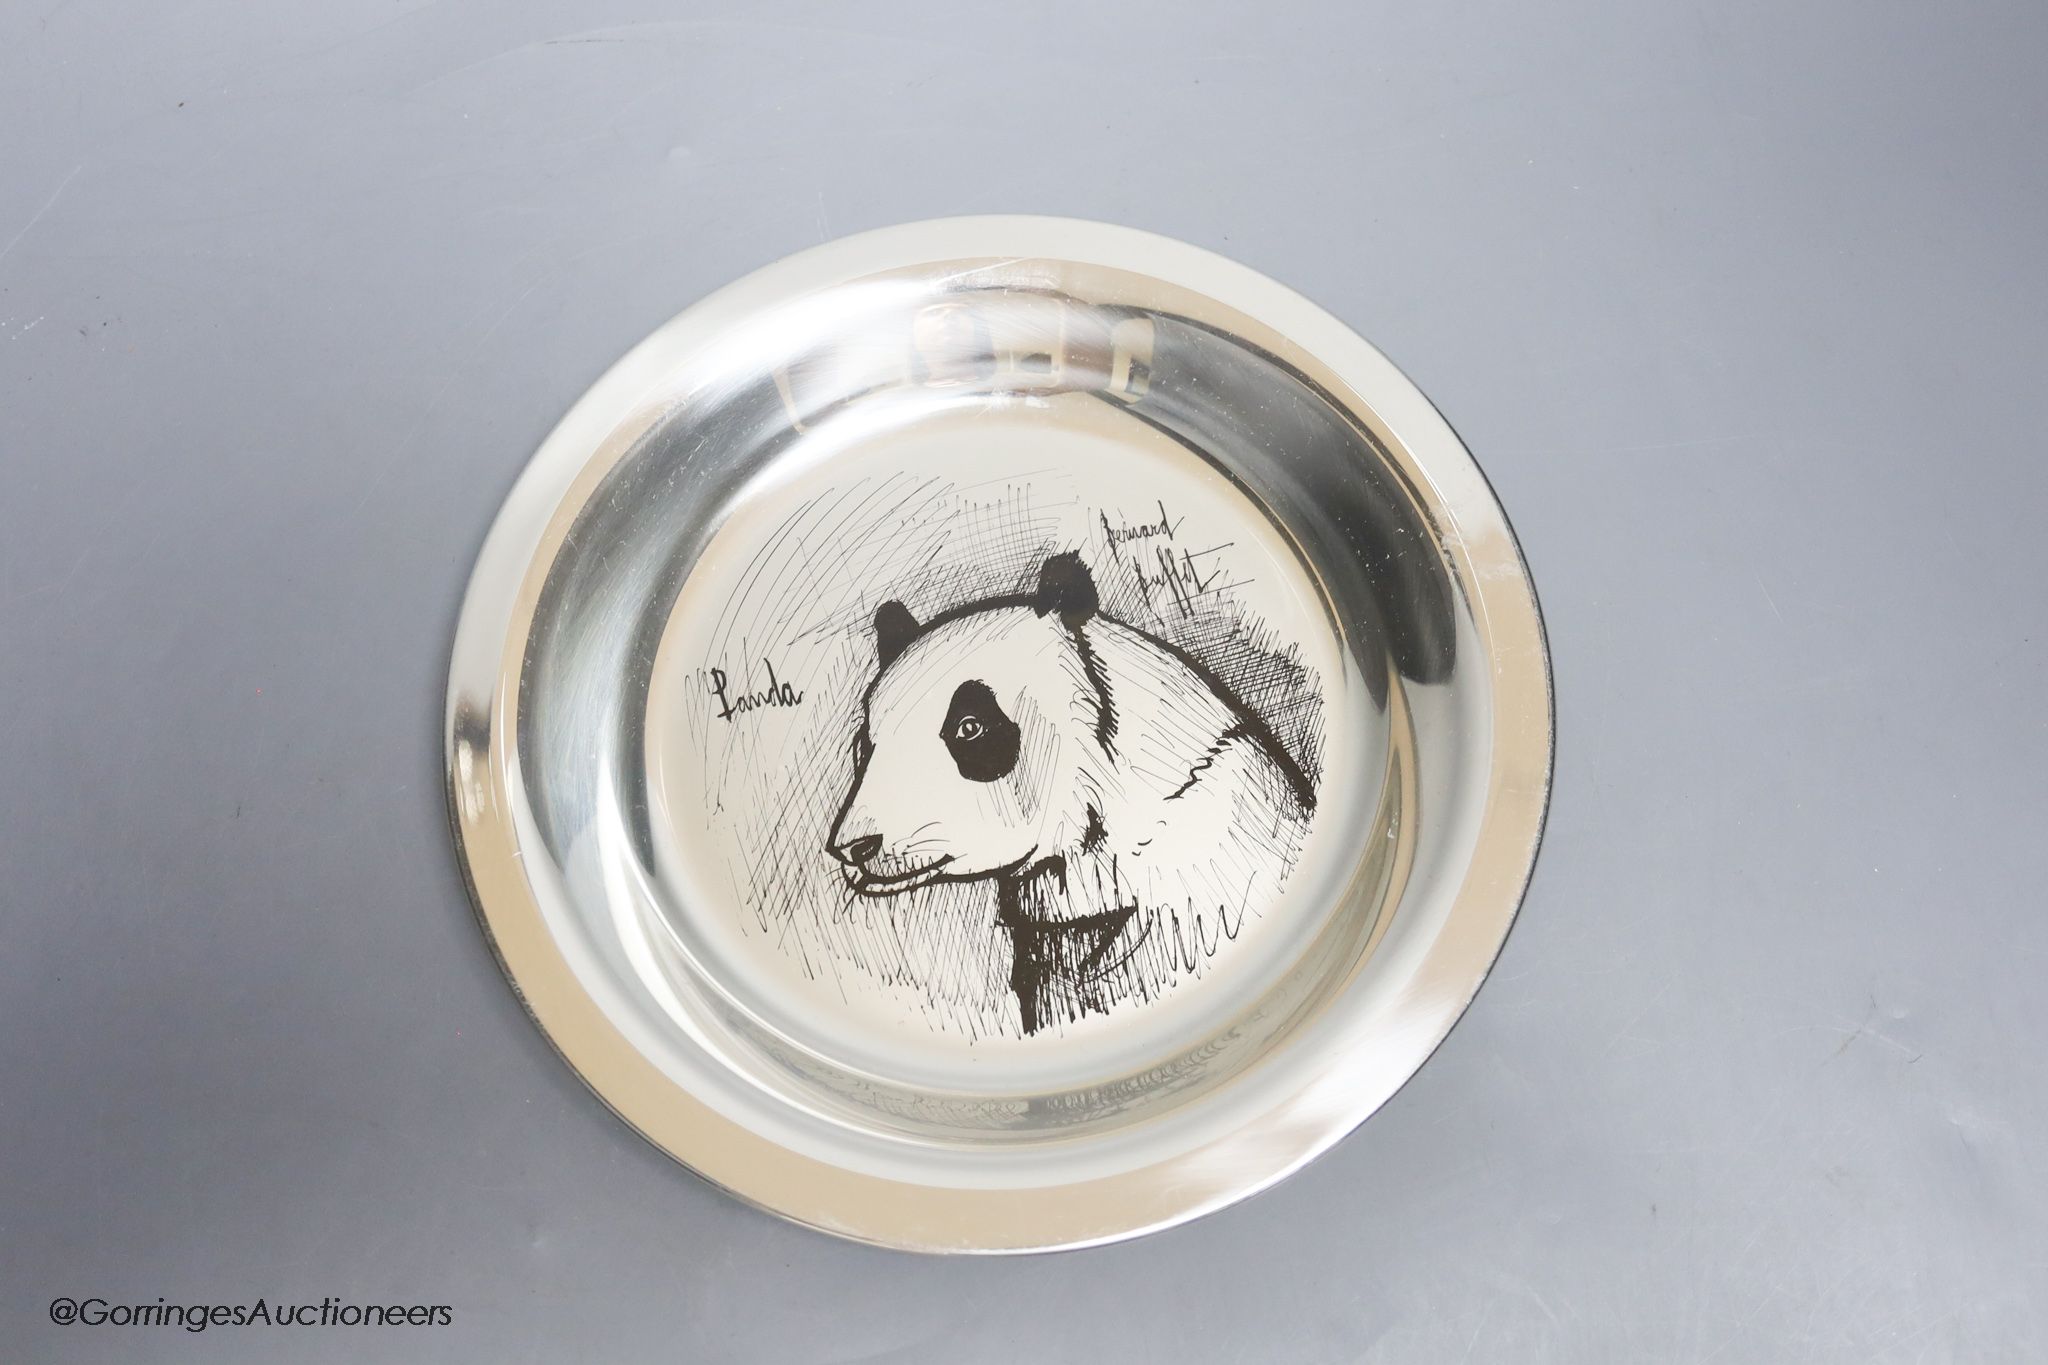 Four modern silver plates, two decorated after Bernard Buffet, dated verso 1973-4, detailing a Gazelle and Panda, each marked ‘Gravée à l’eau forte sue agent sterling 1er titre’ together with an example decorated by Pete